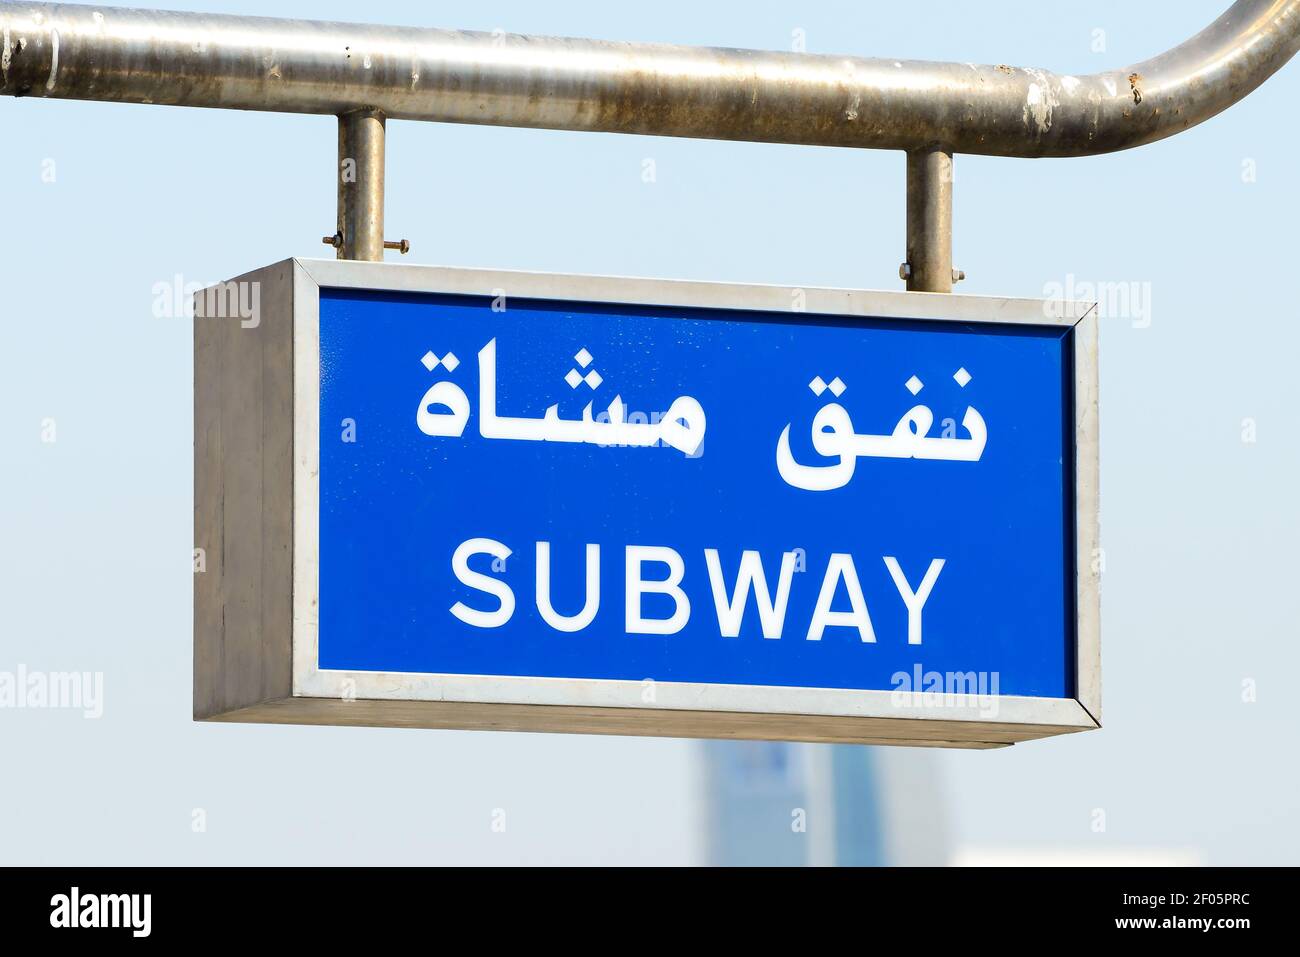 Subway sign board in english and arabic in Dubai, United Arab Emirates a Middle East country. Blue and white signboard. Stock Photo